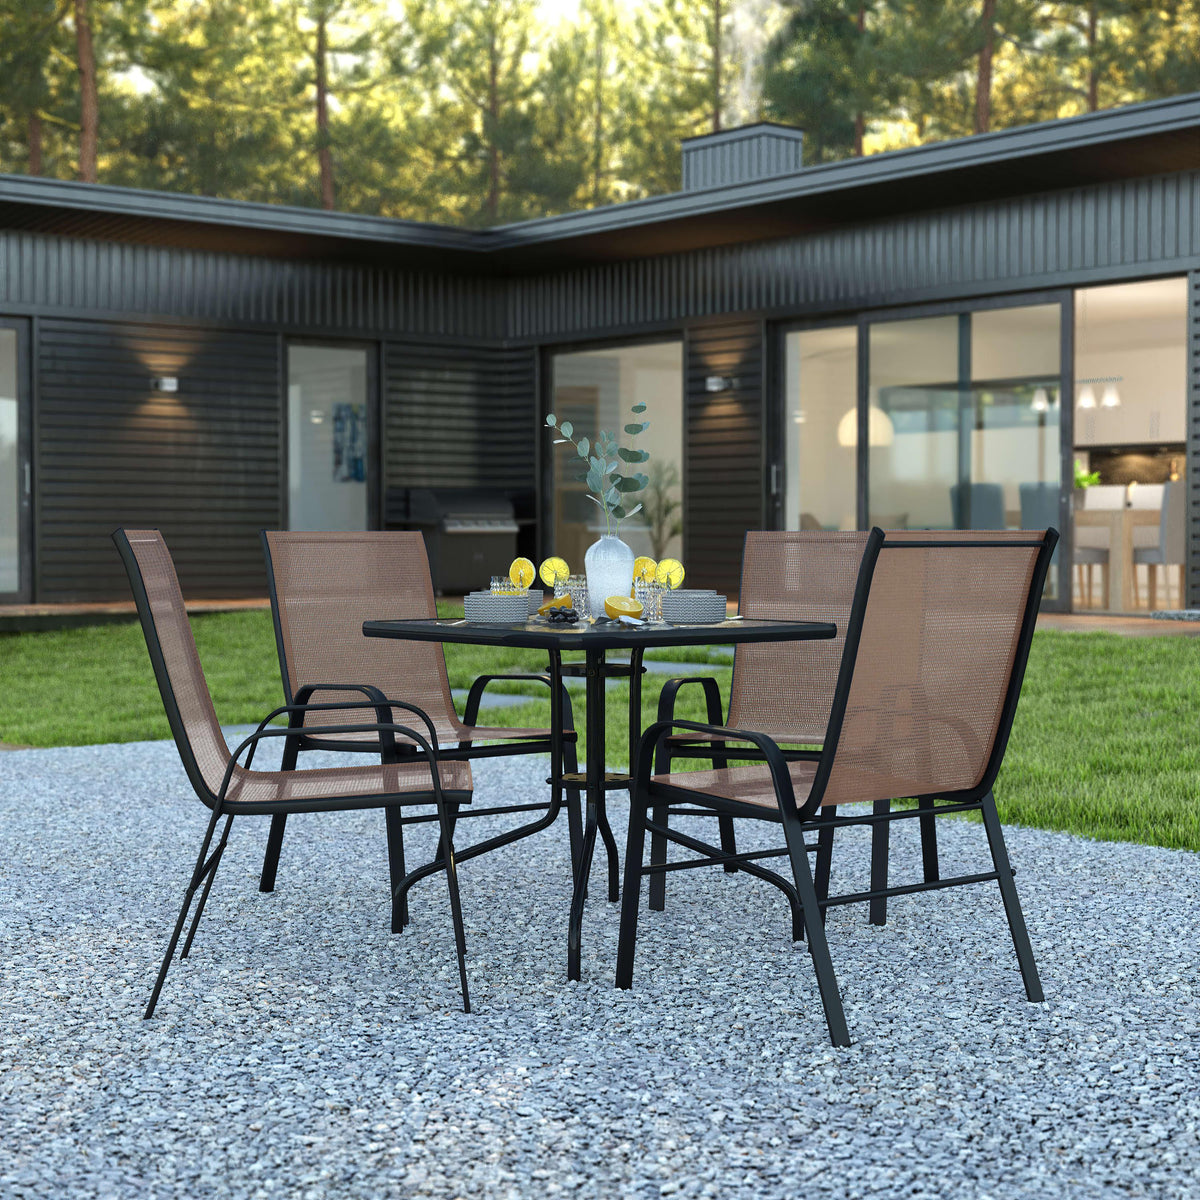 Brown |#| 5 Piece Patio Dining Set - 31.5inch Square Glass Table, 4 Brown Flex Stack Chairs